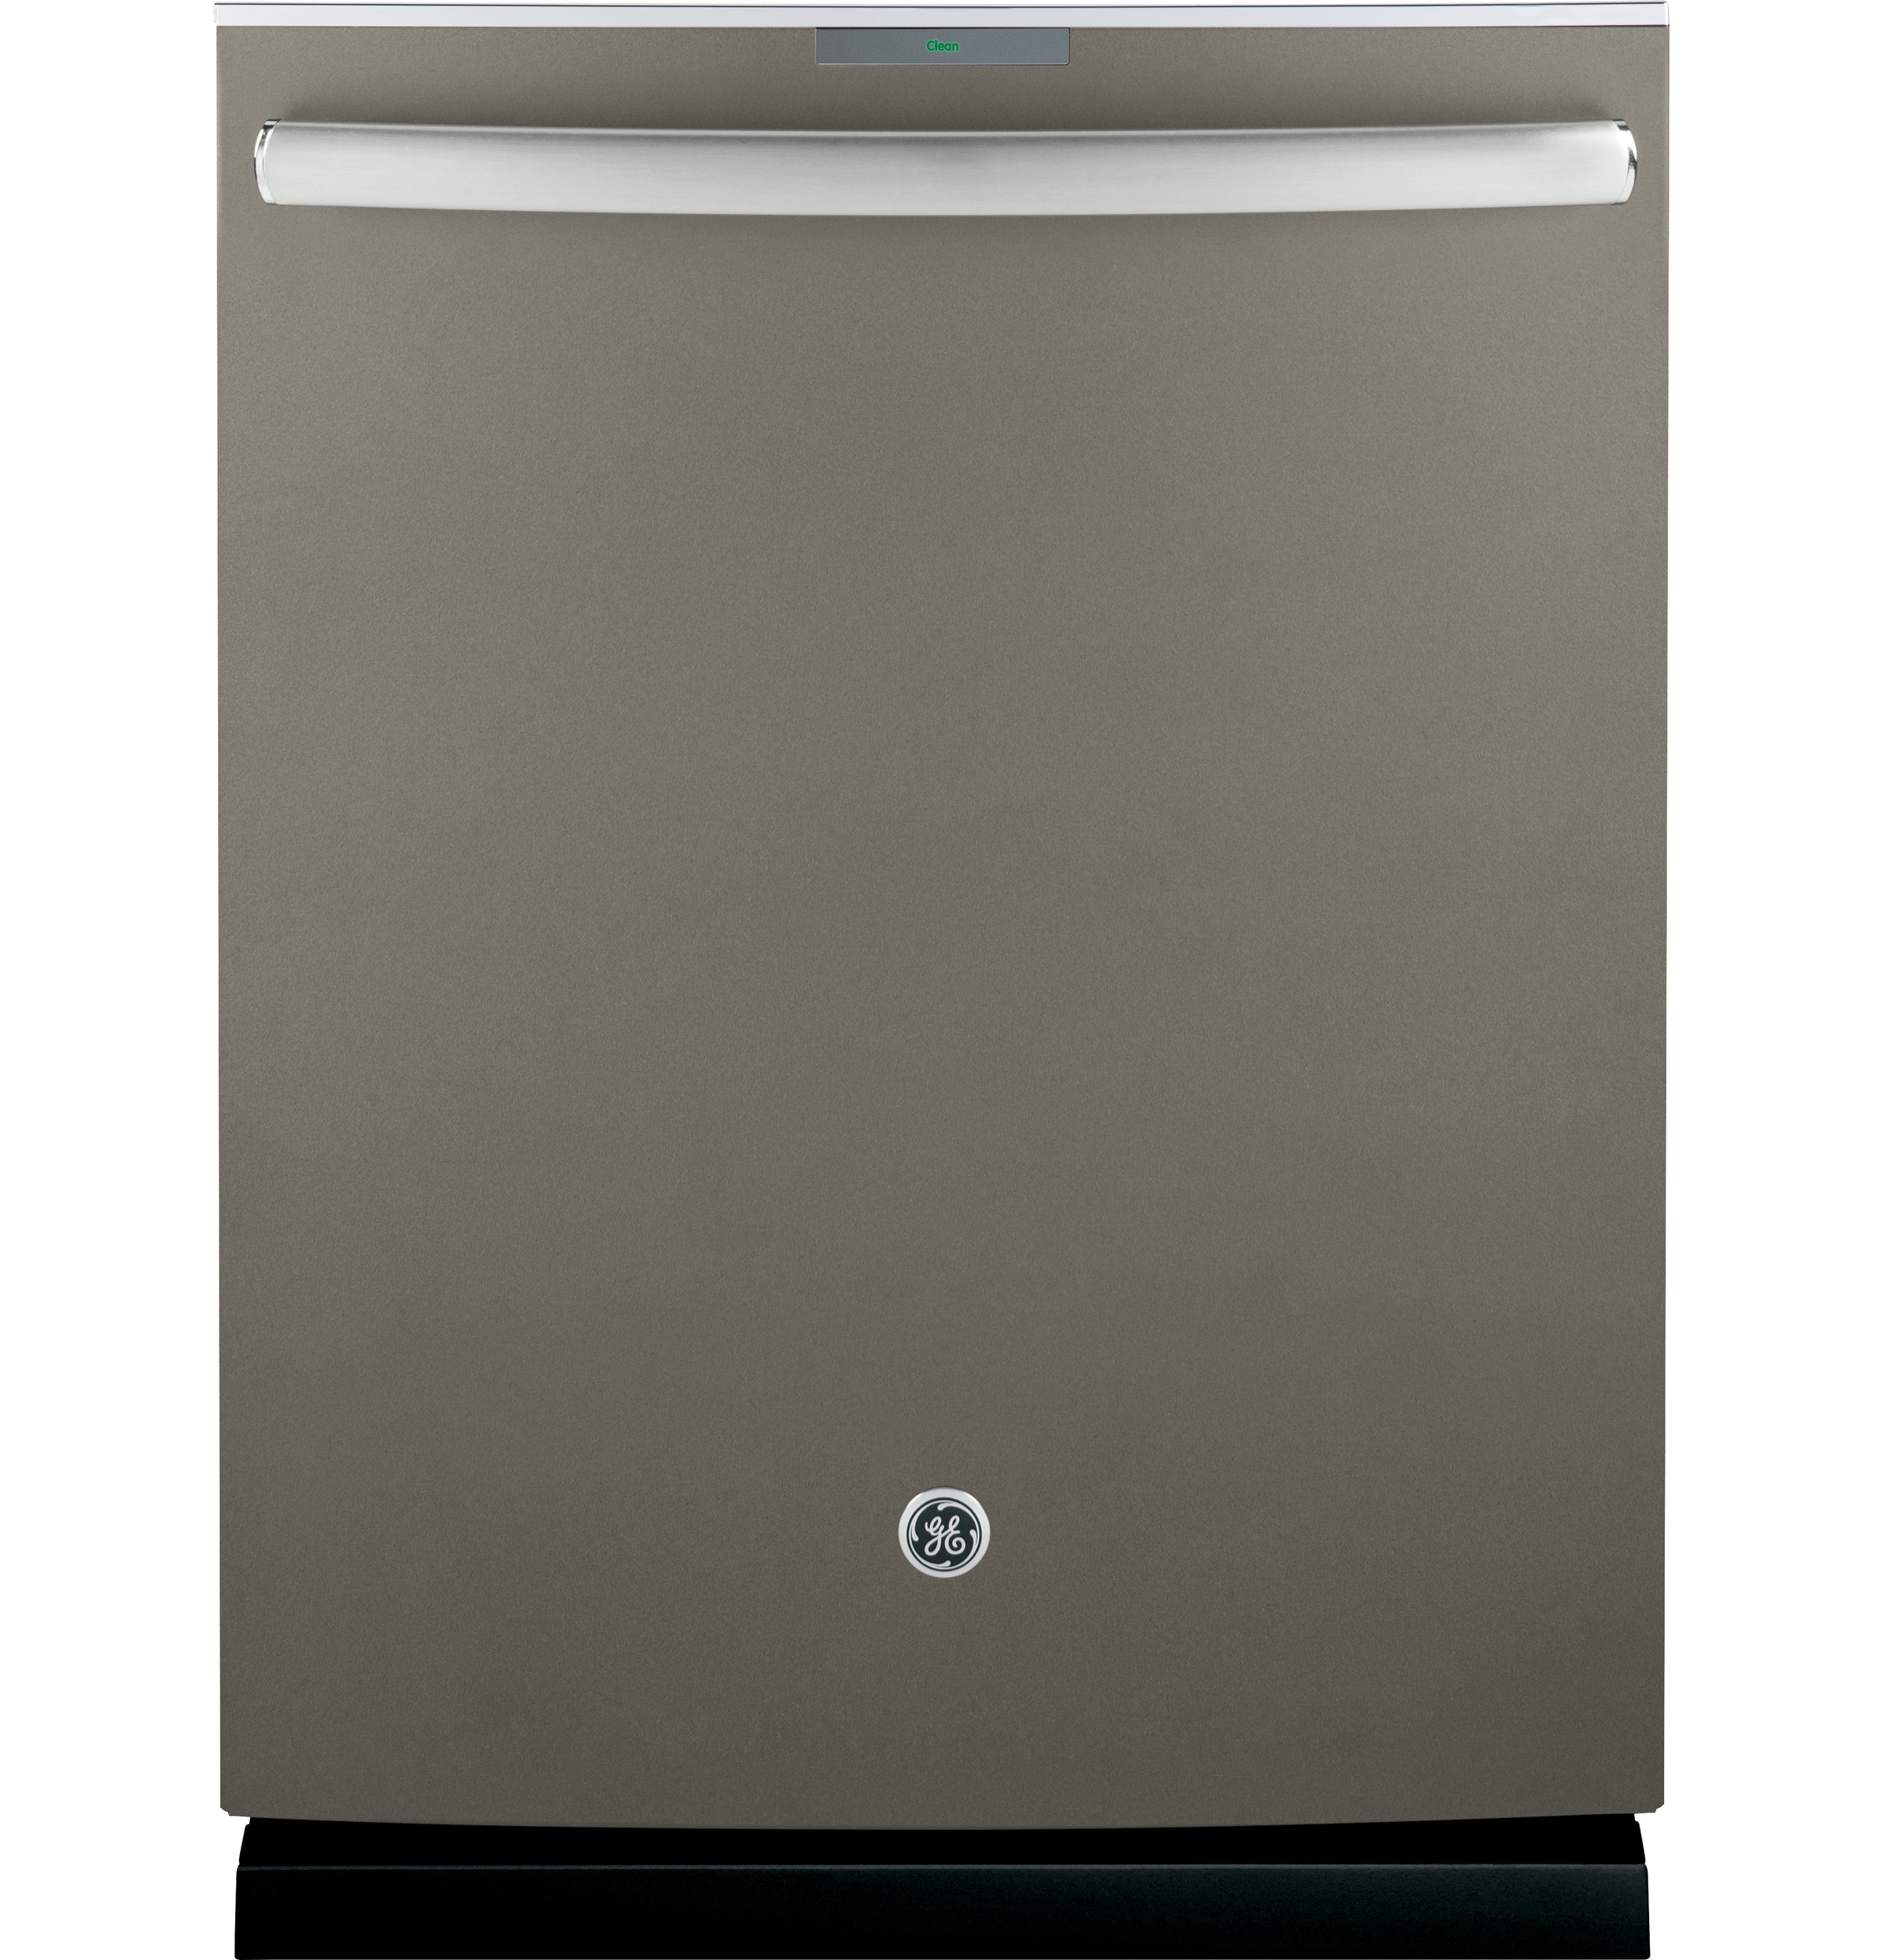 GE Profile™ Stainless Steel Interior Dishwasher with Hidden Controls